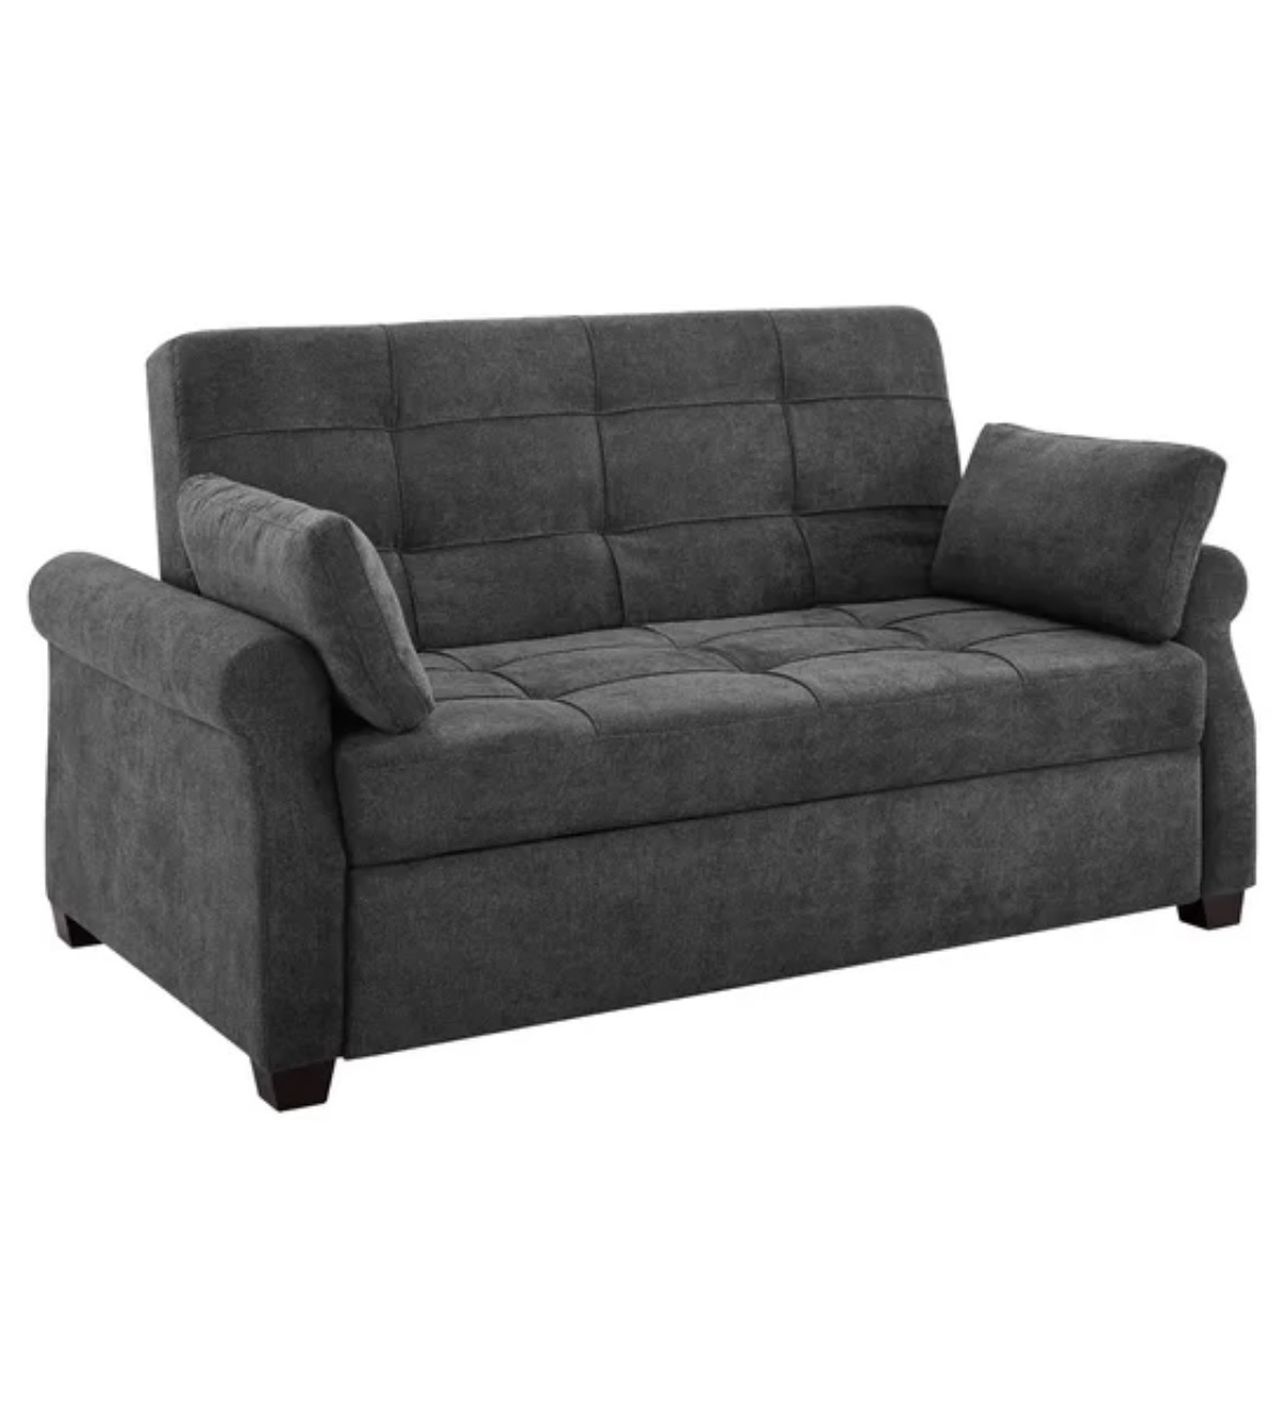 sabrina microfiber 72.6" rolled arm sofa bed couch